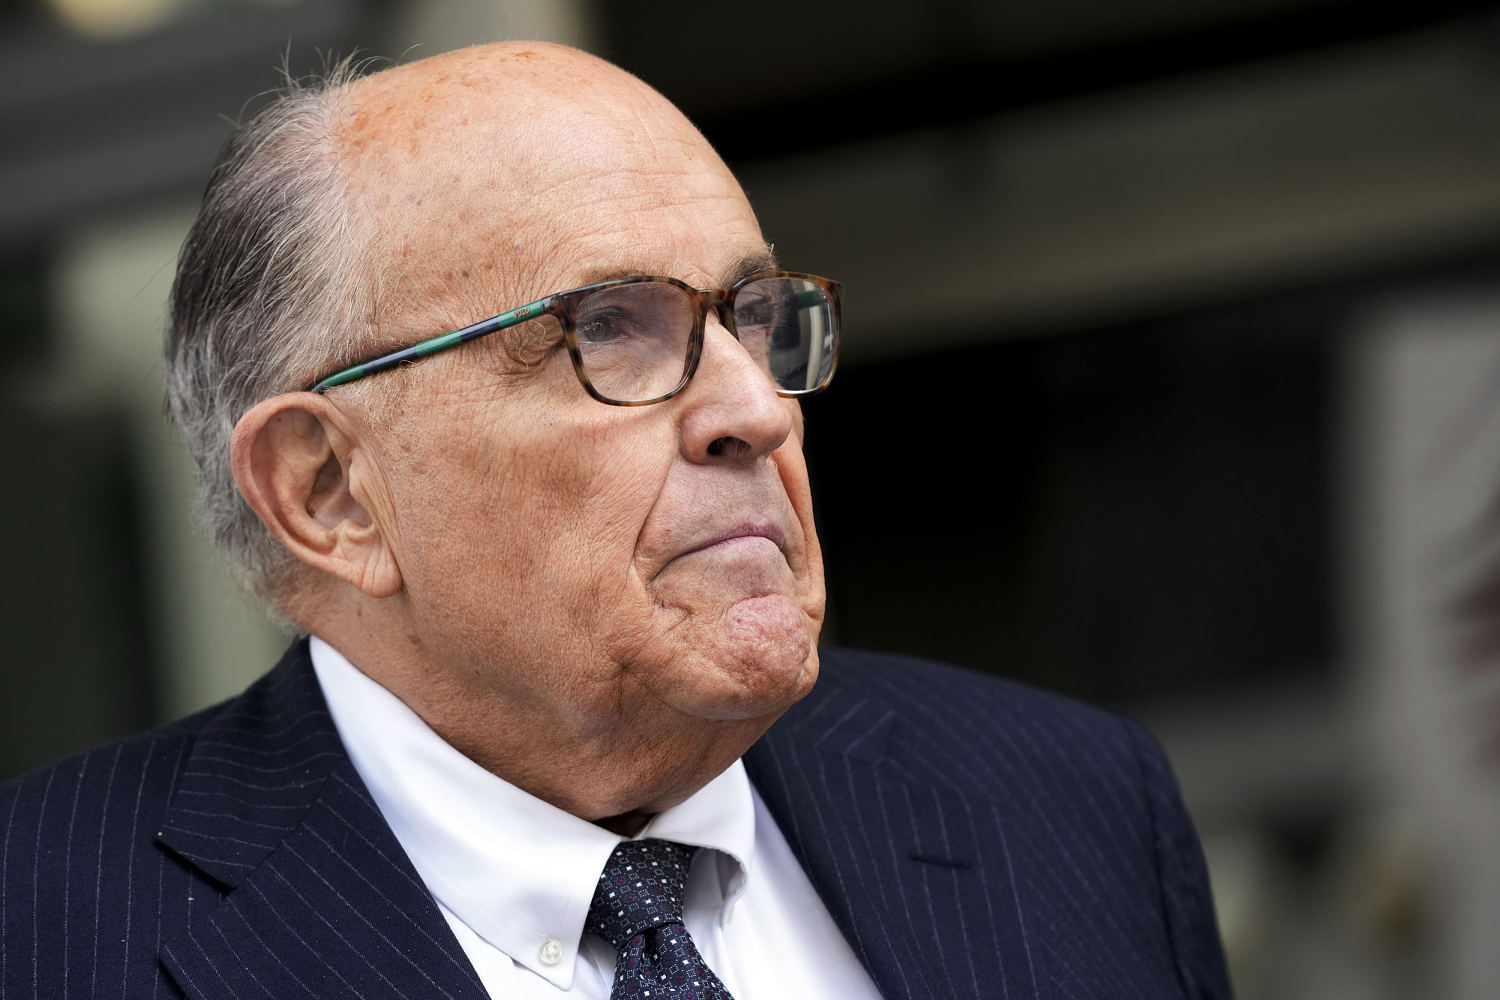 Rudy Giuliani’s new gig is sure to invite legal scrutiny